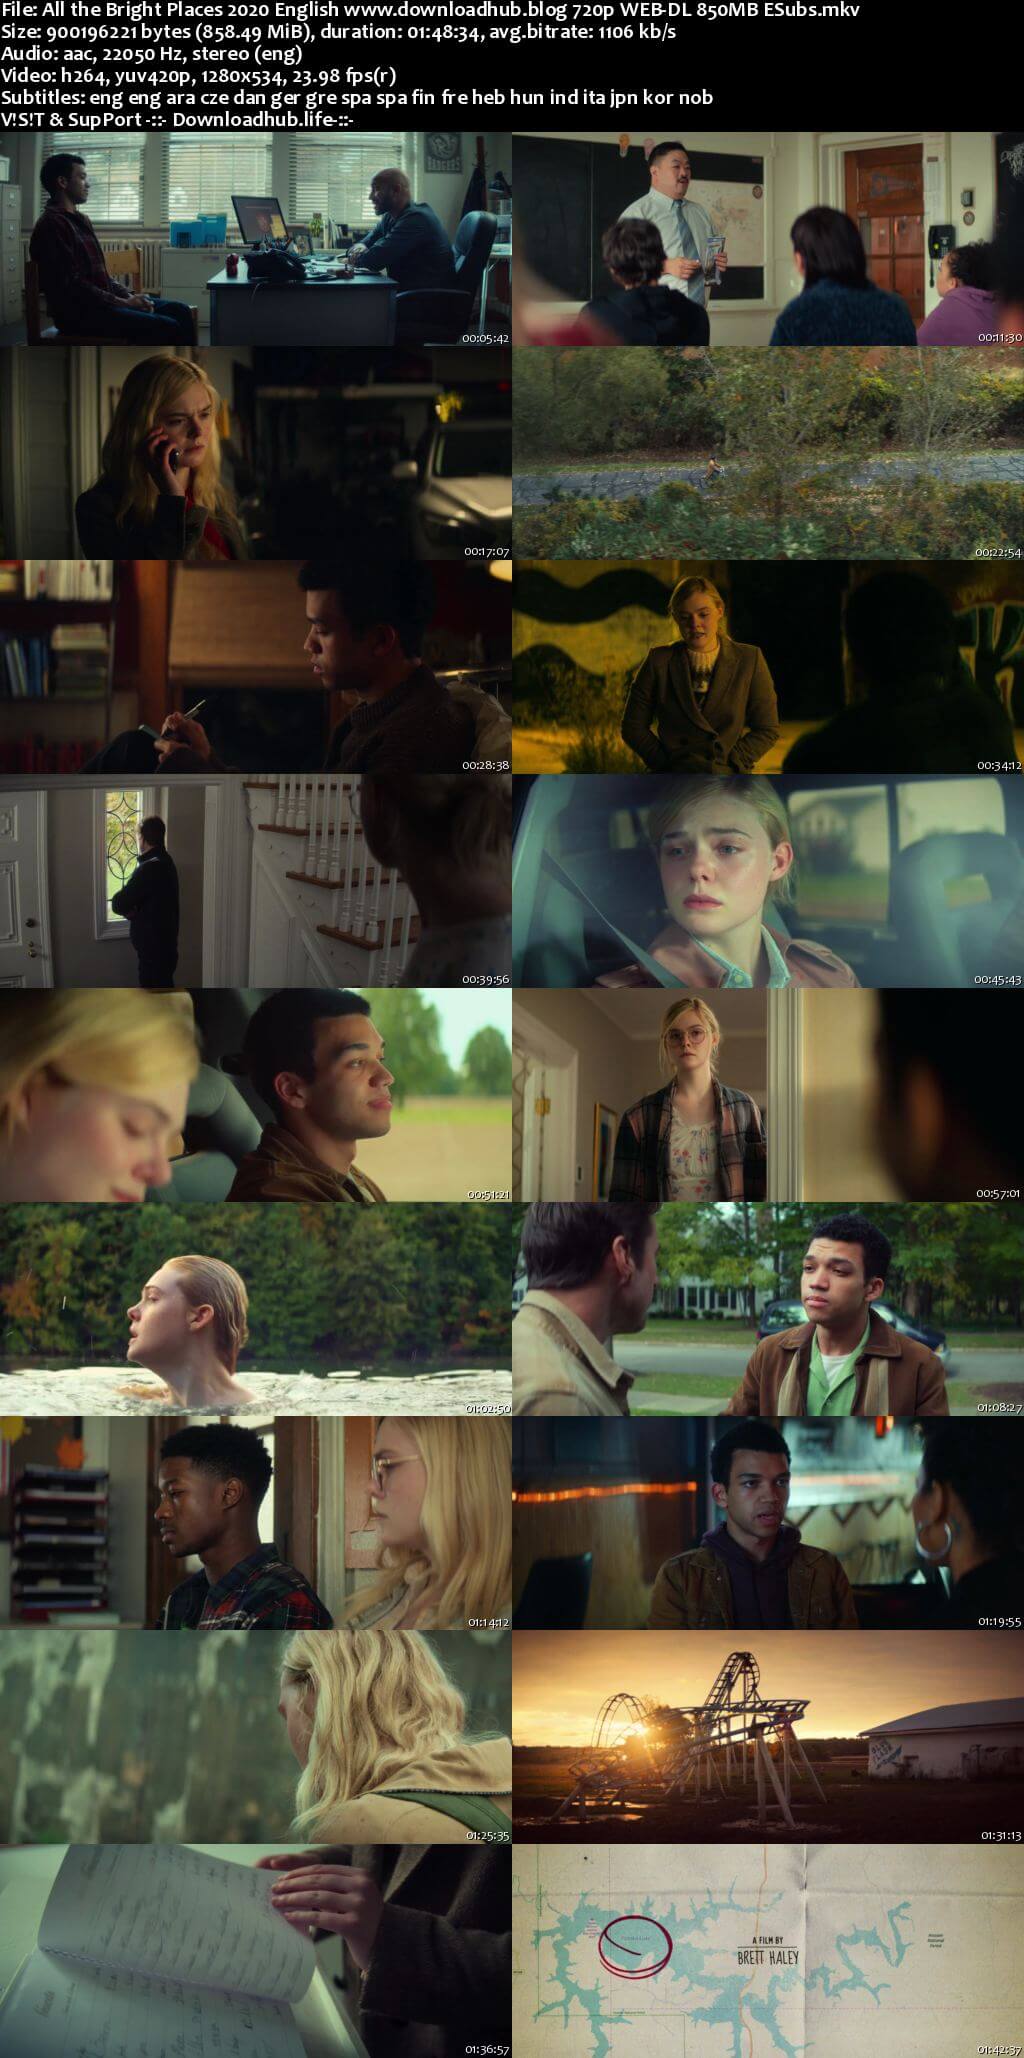 All the Bright Places 2020 English 720p NF Web-DL 850MB MSubs